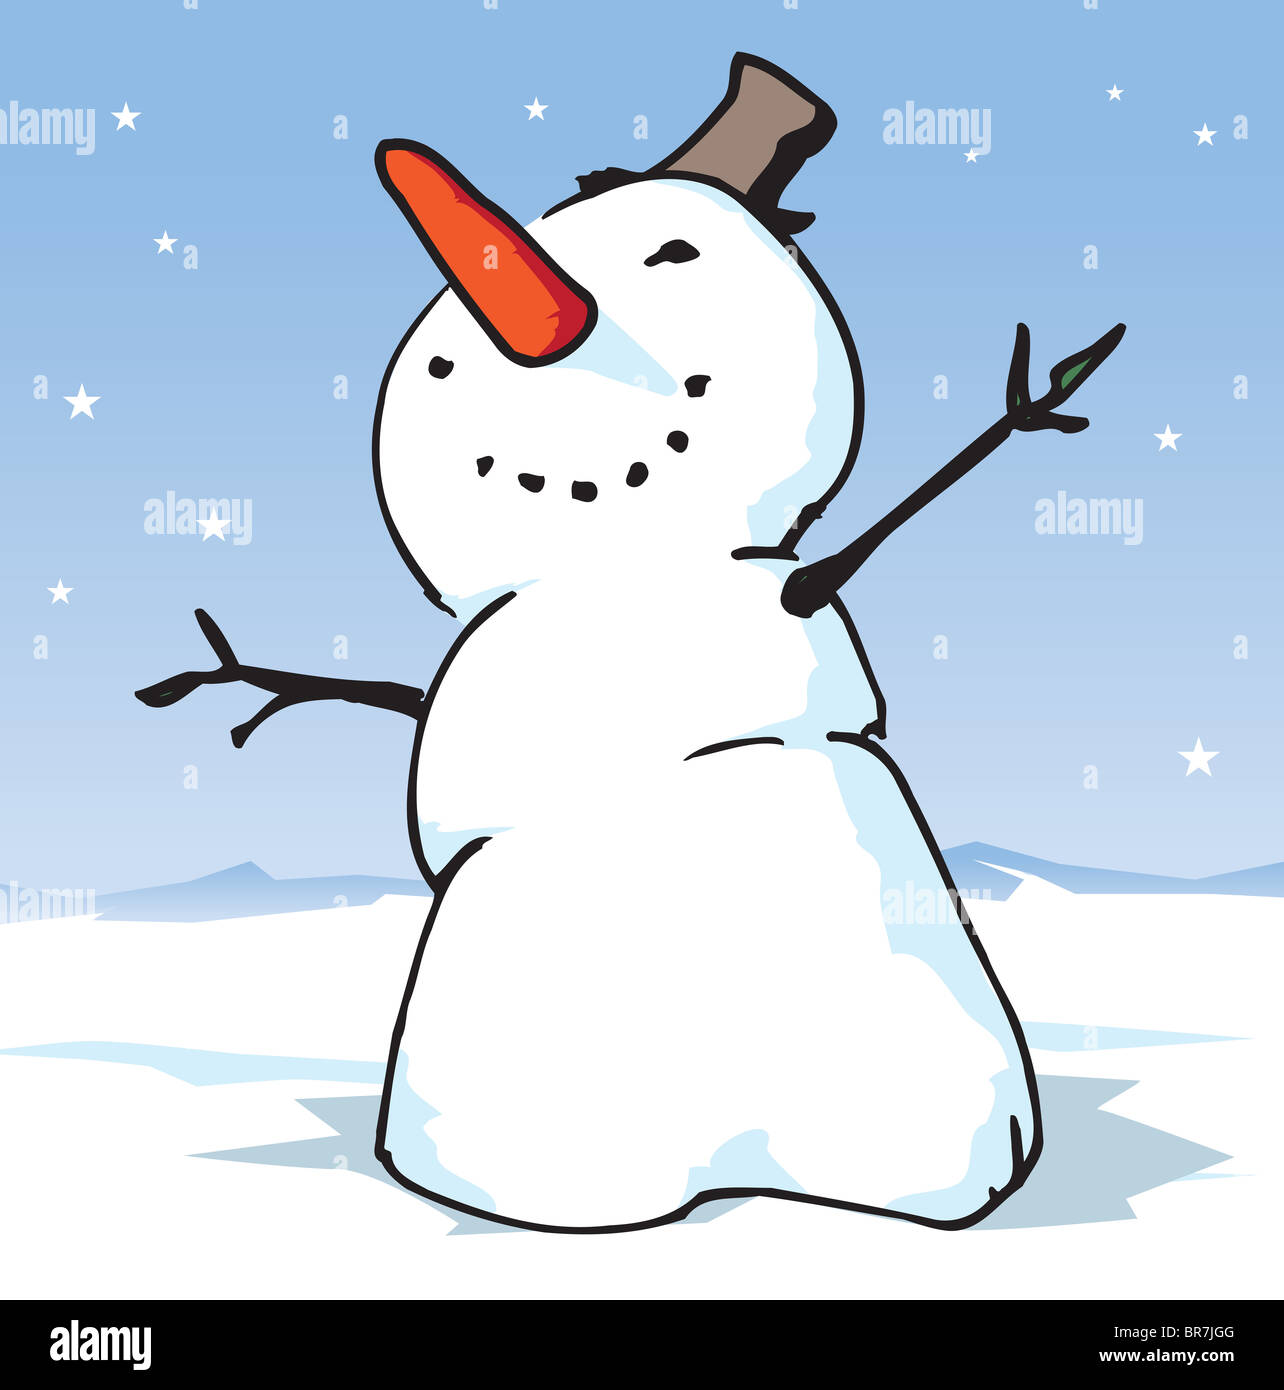 A snowman wearing a top hat in a snowy landscape Stock Photo - Alamy